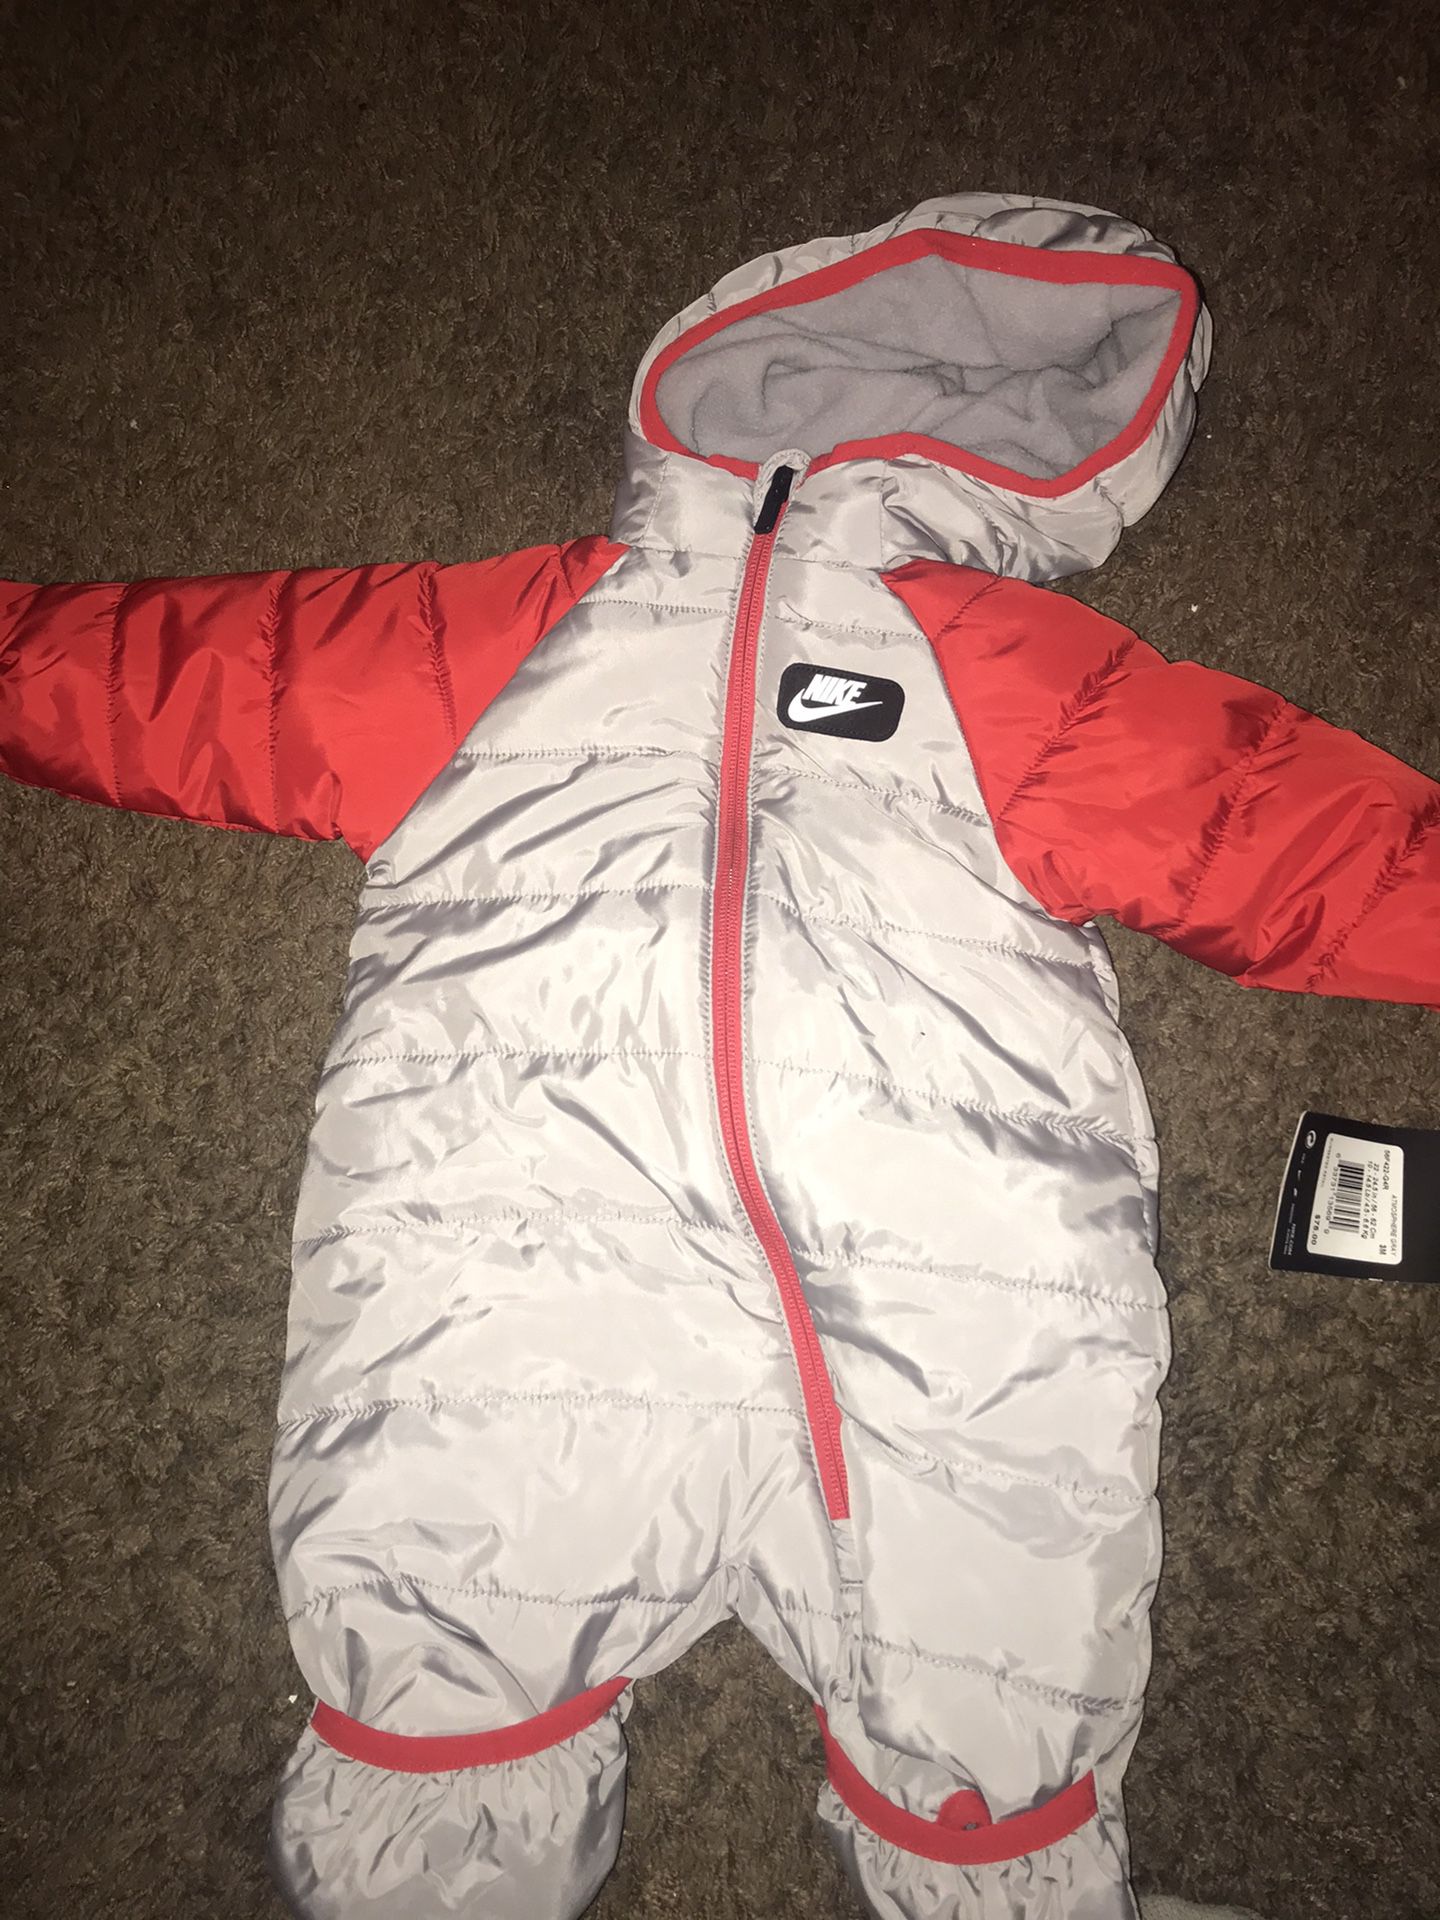 Nike snow suit 3 month old